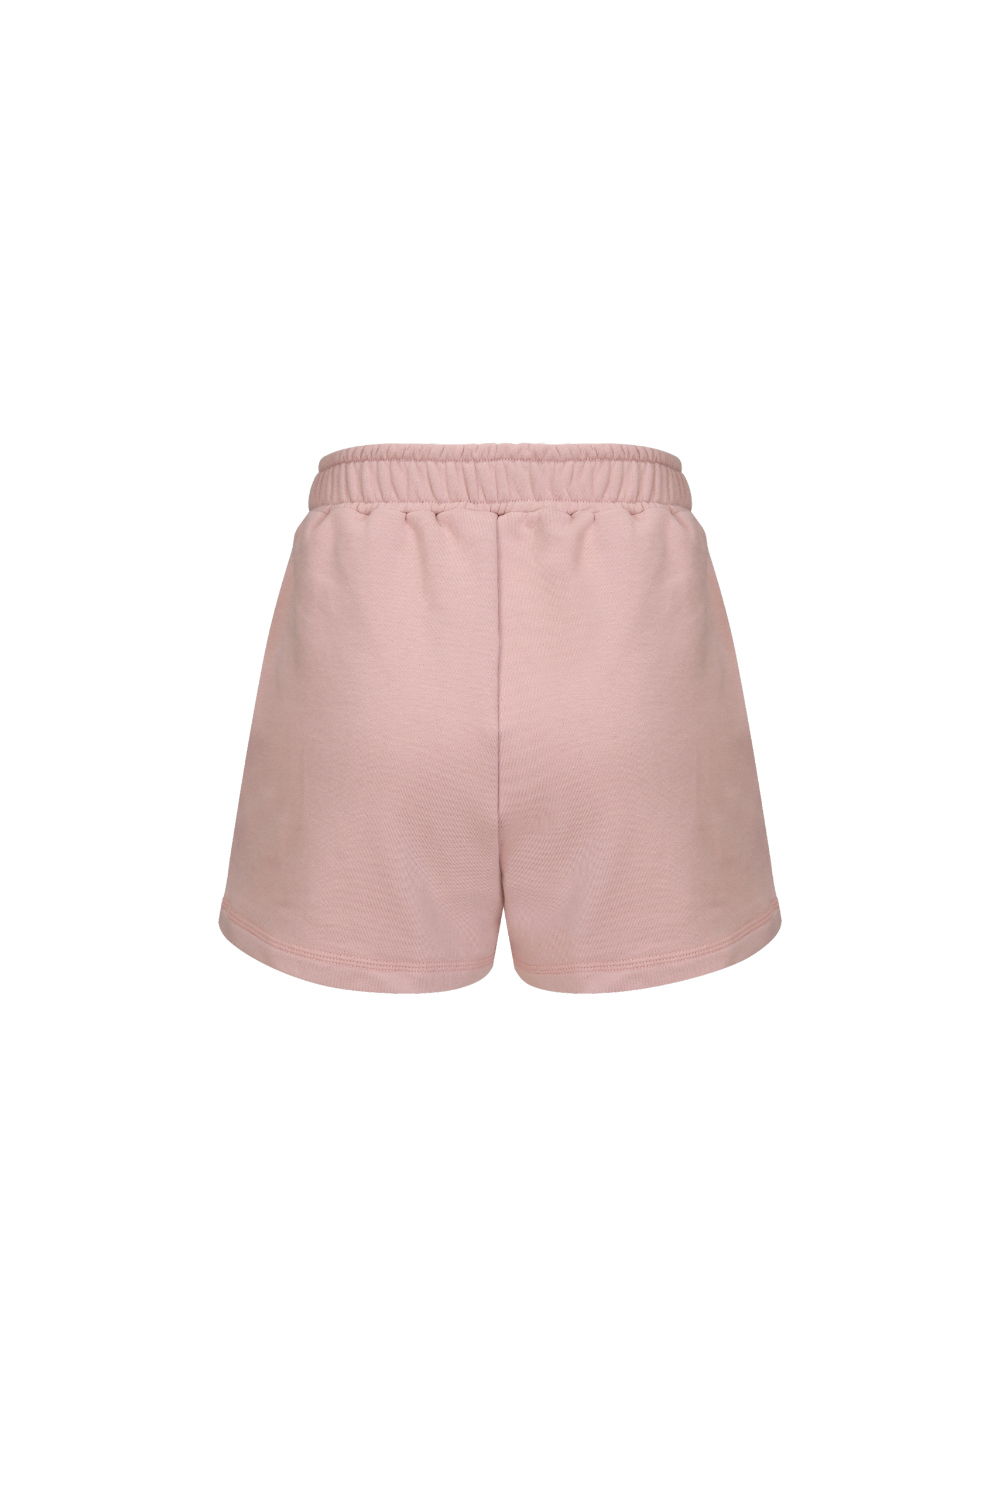 shorts baby pink color image-S2L2